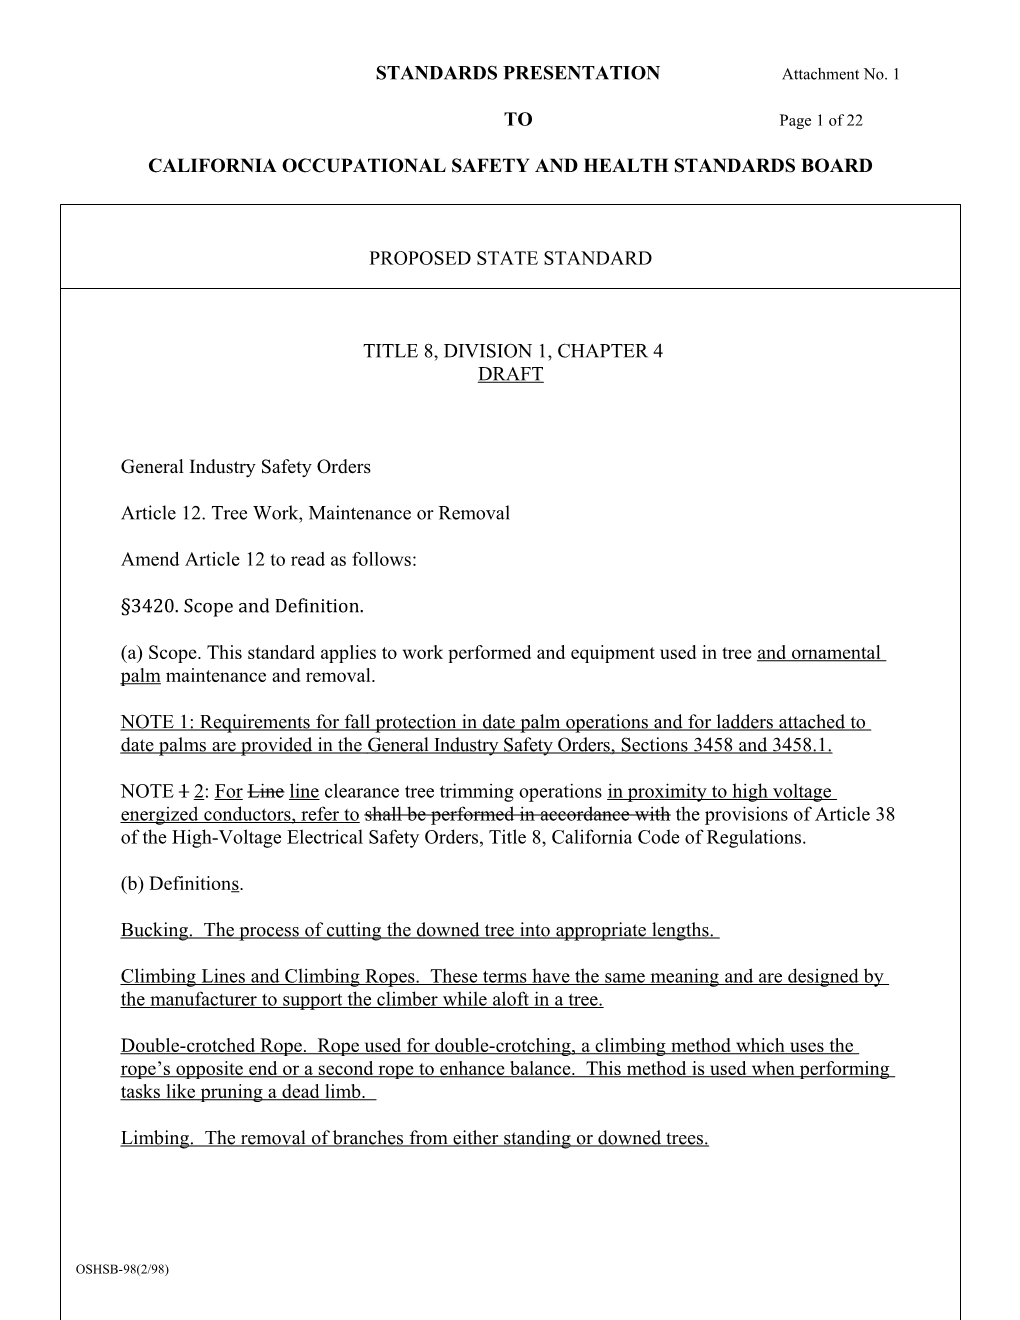 California Occupational Safety and Health Standards Board s2